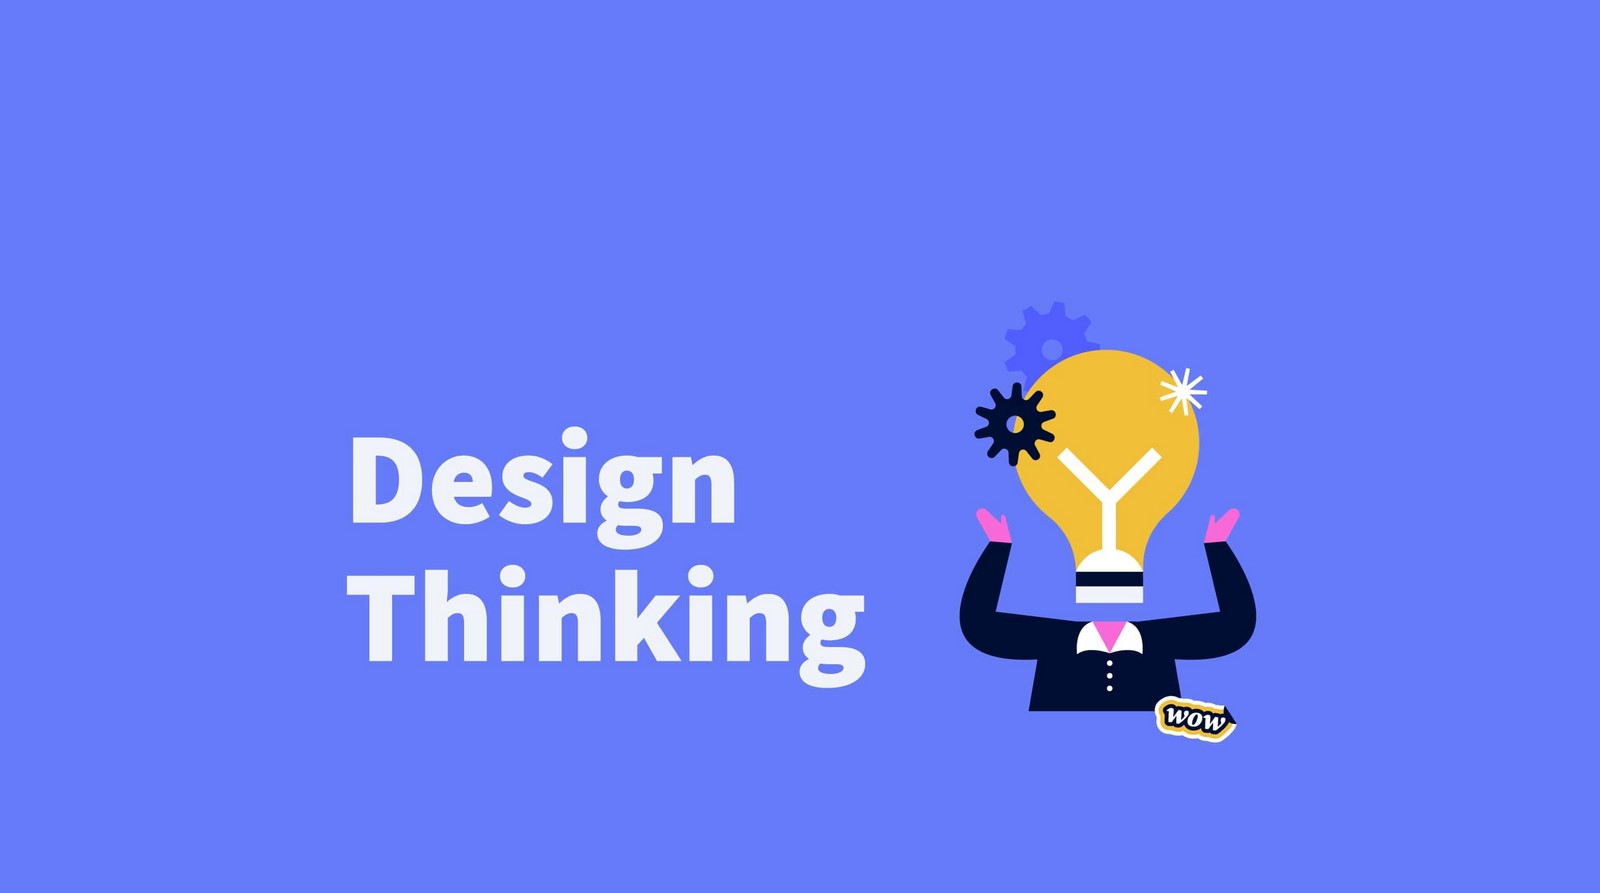 Future-Proofing Career with Design Thinking - Sheet1